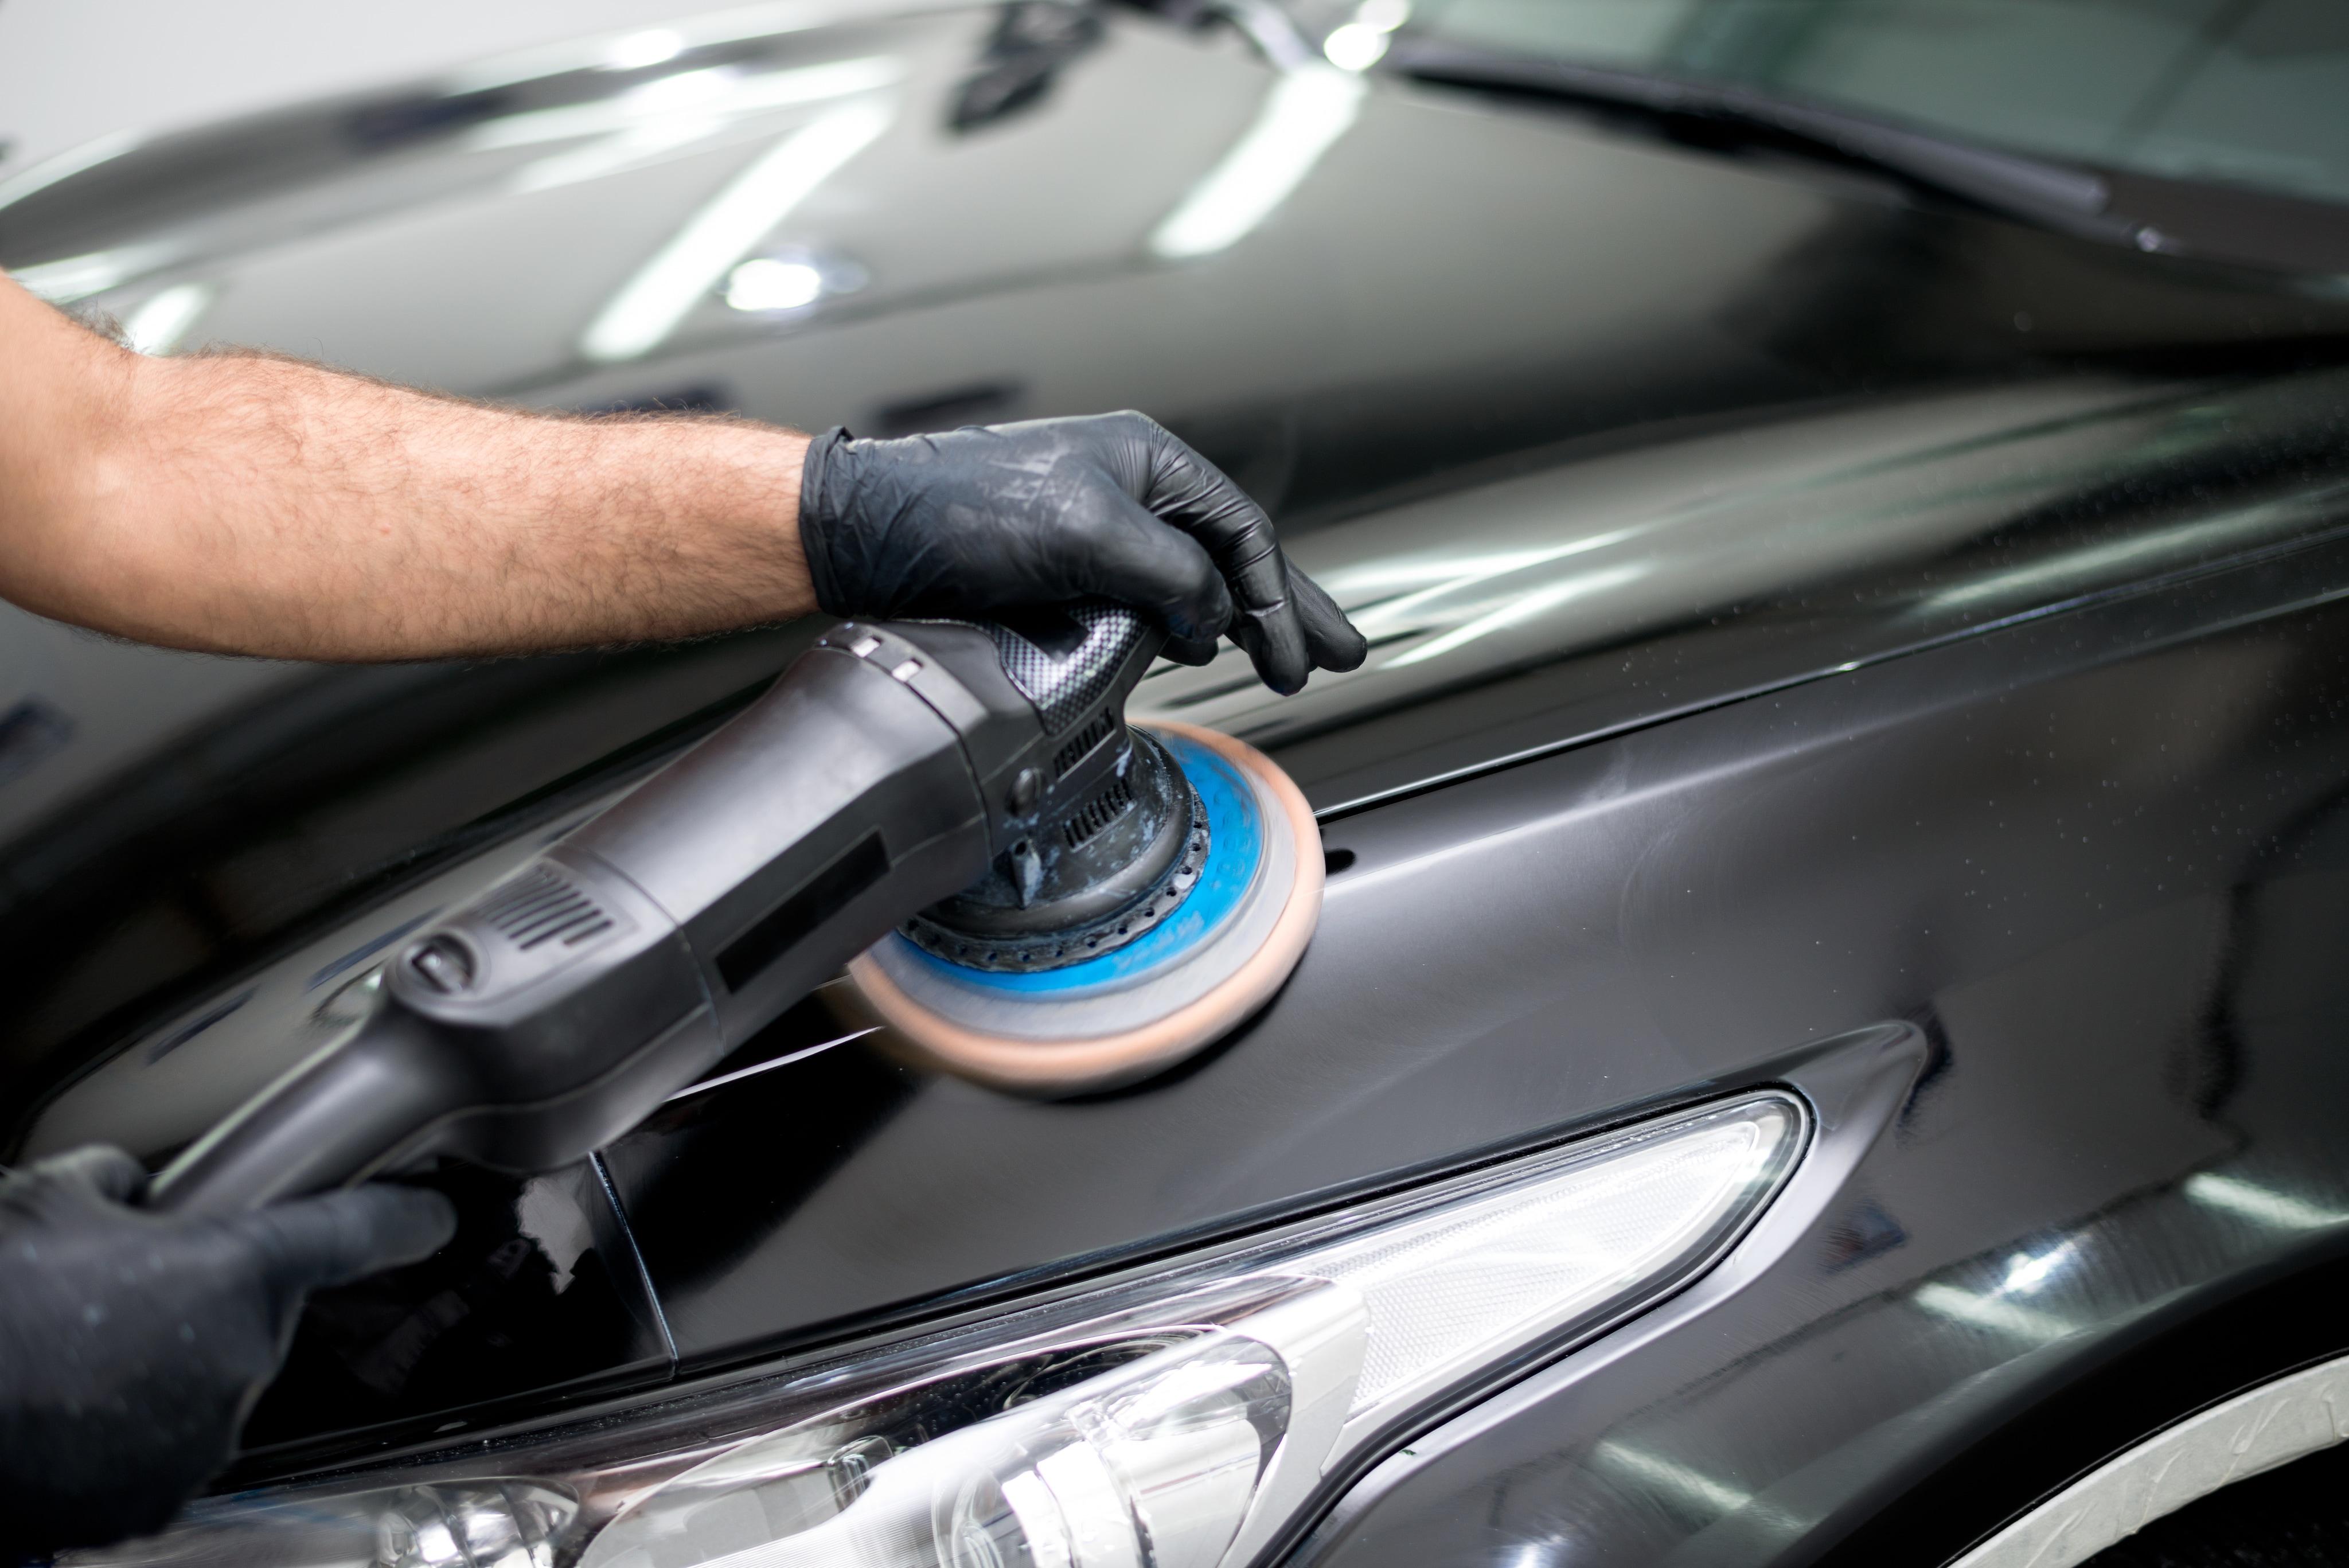 Image of hands using a polishing tool on a car body